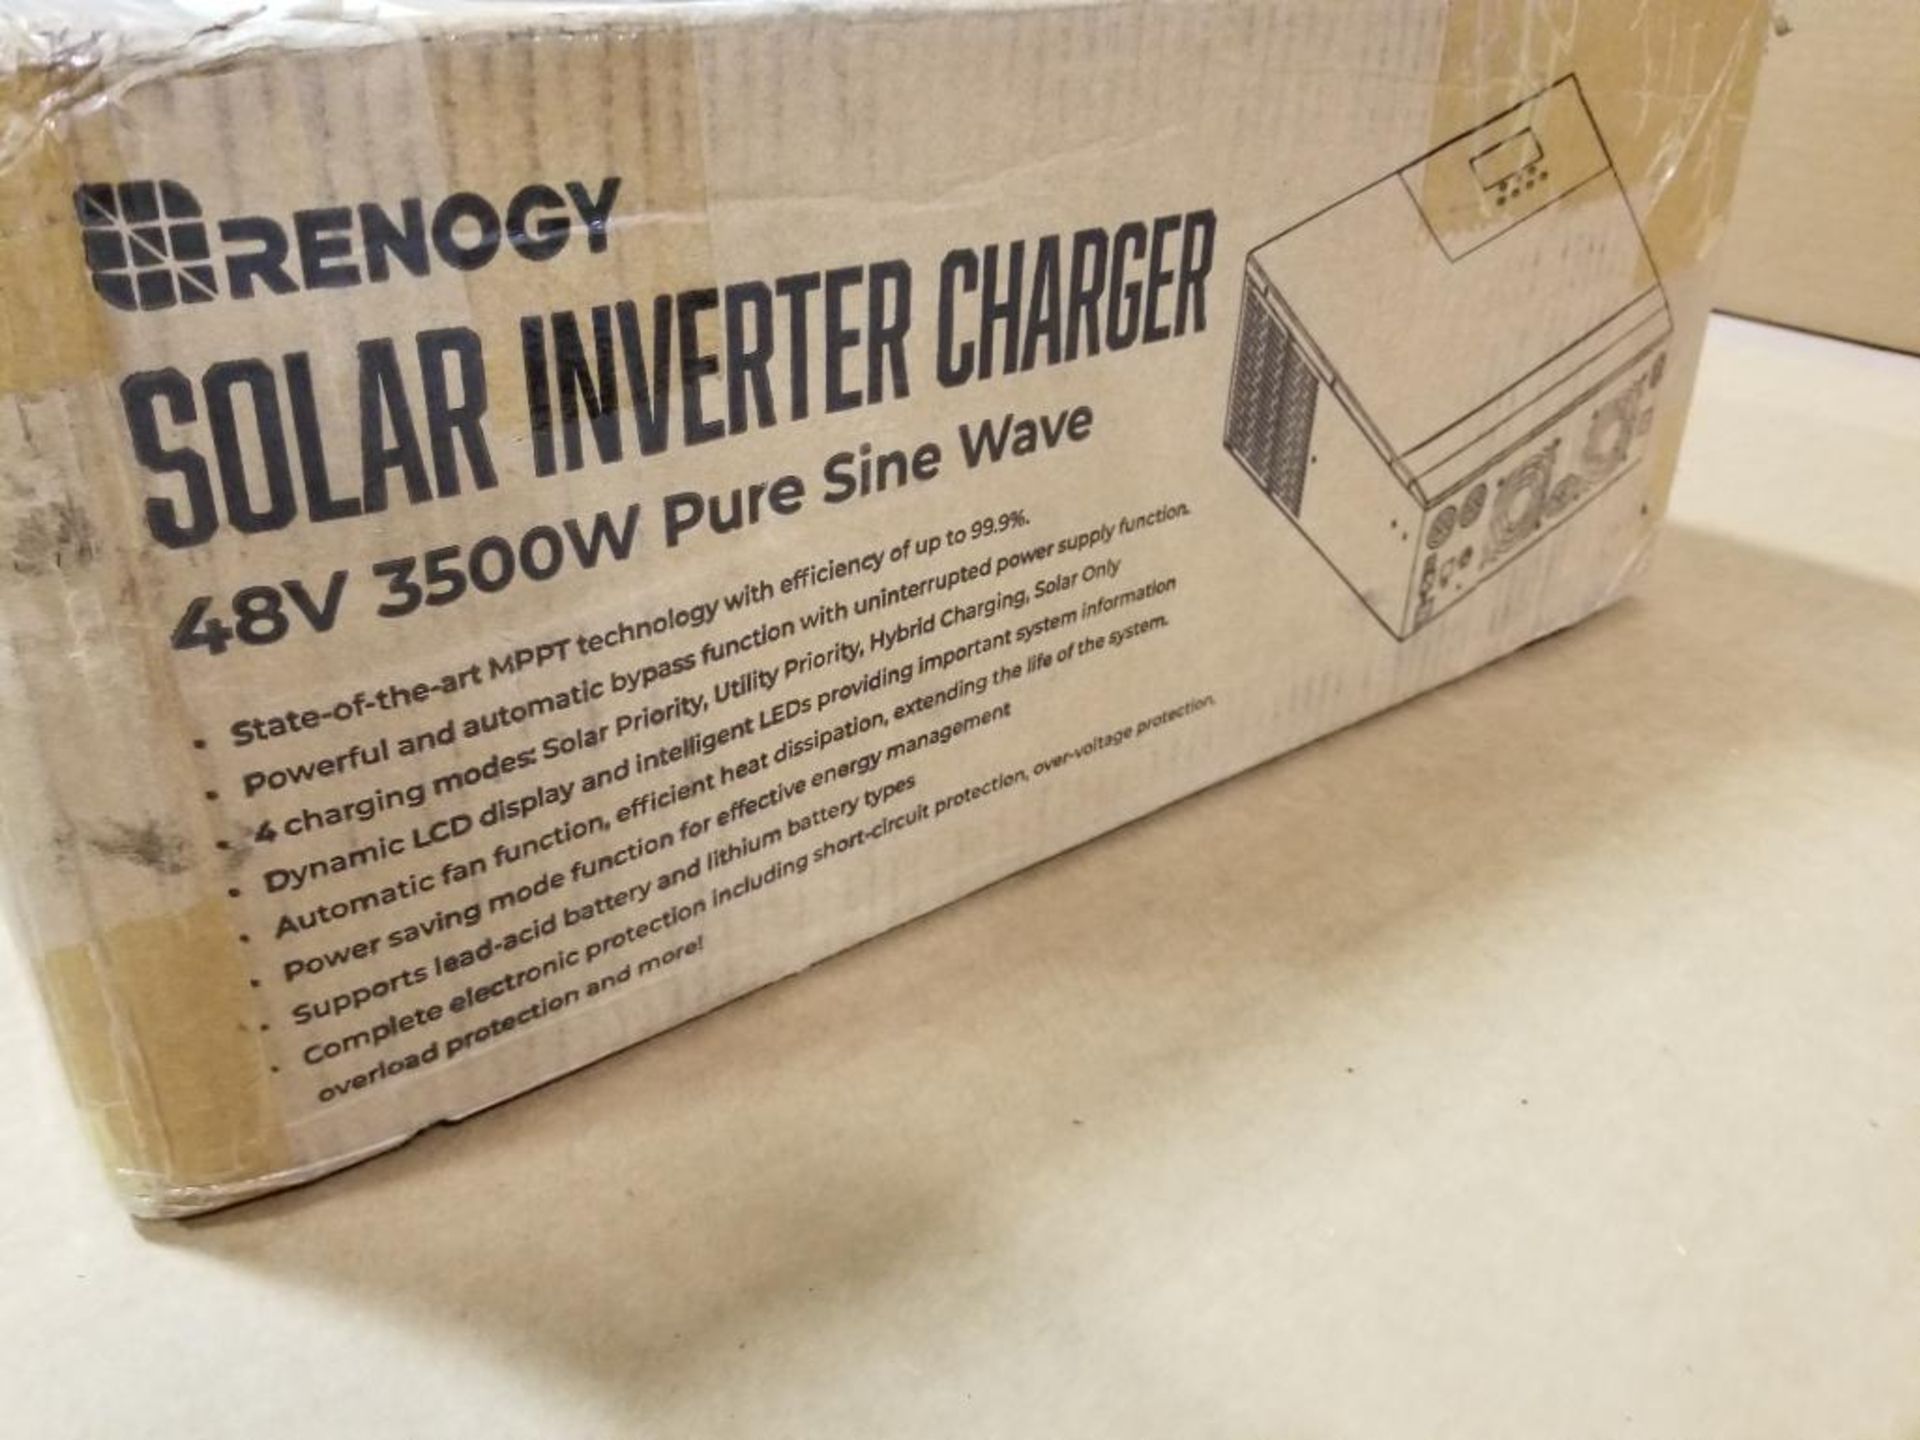 Renolgy solar inverter charger 48V 3500W. RIV4835CH1S-G2-US. - Image 3 of 8